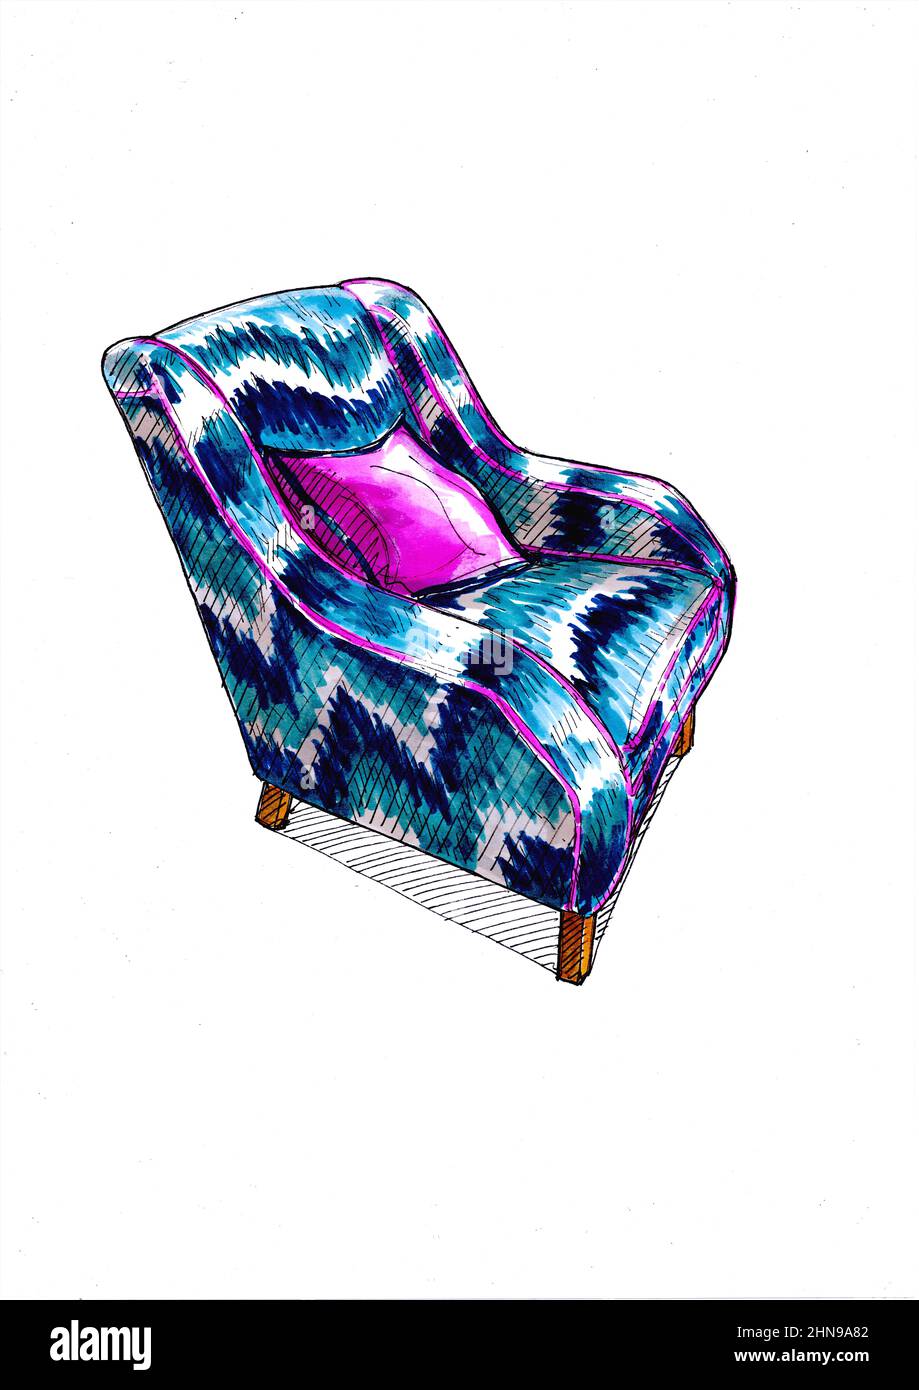 Sketch for a chair in a colourful patterned fabric. Stock Photo